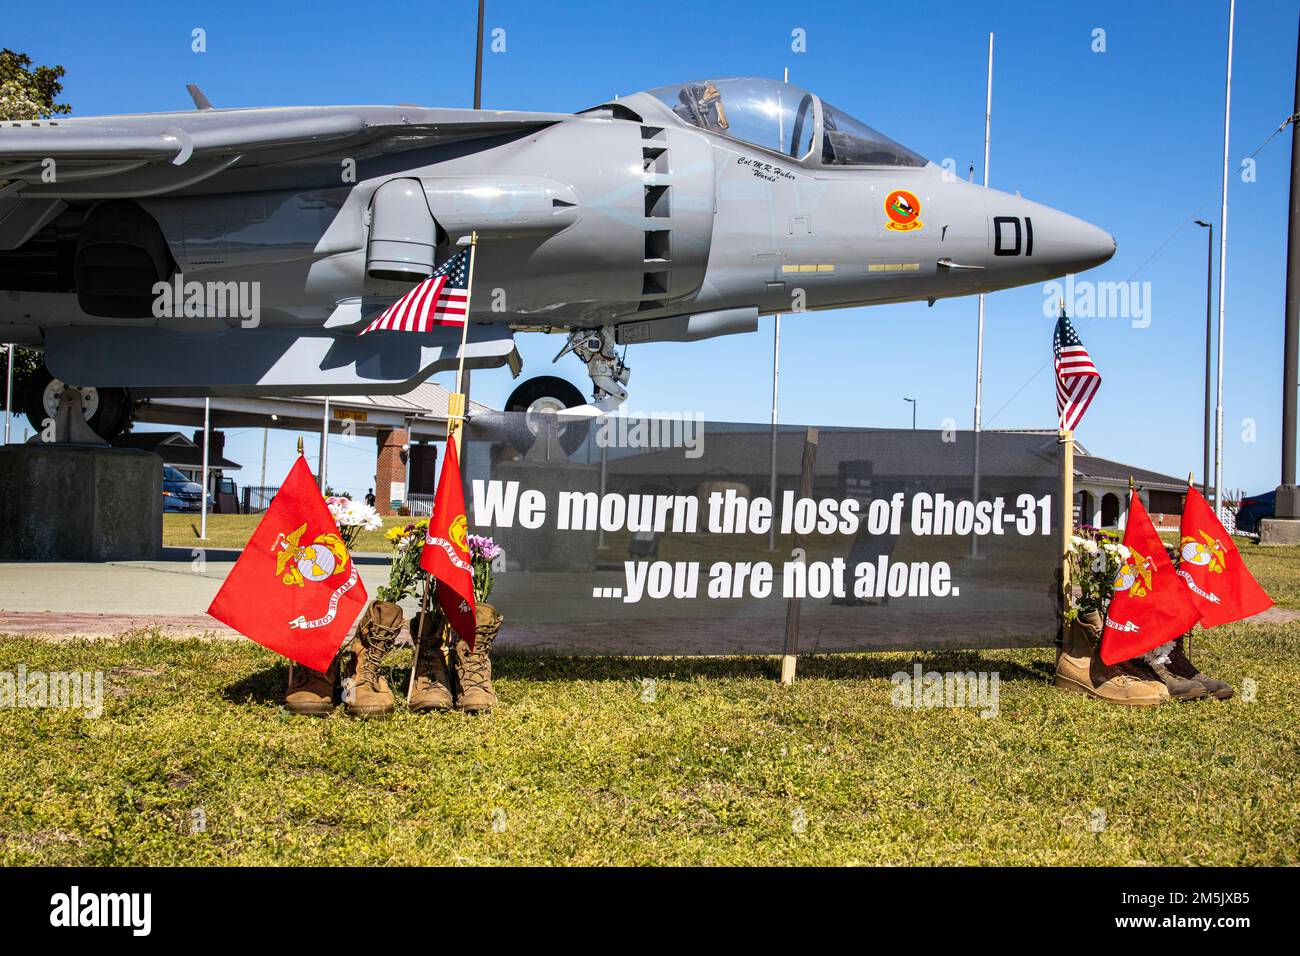 The Marine Corps Air Station Cherry Point (MCAS) Spouses Club set up a memorial for Ghost-31 at MCAS Cherry Point, North Carolina, March 21, 2022. Stock Photo